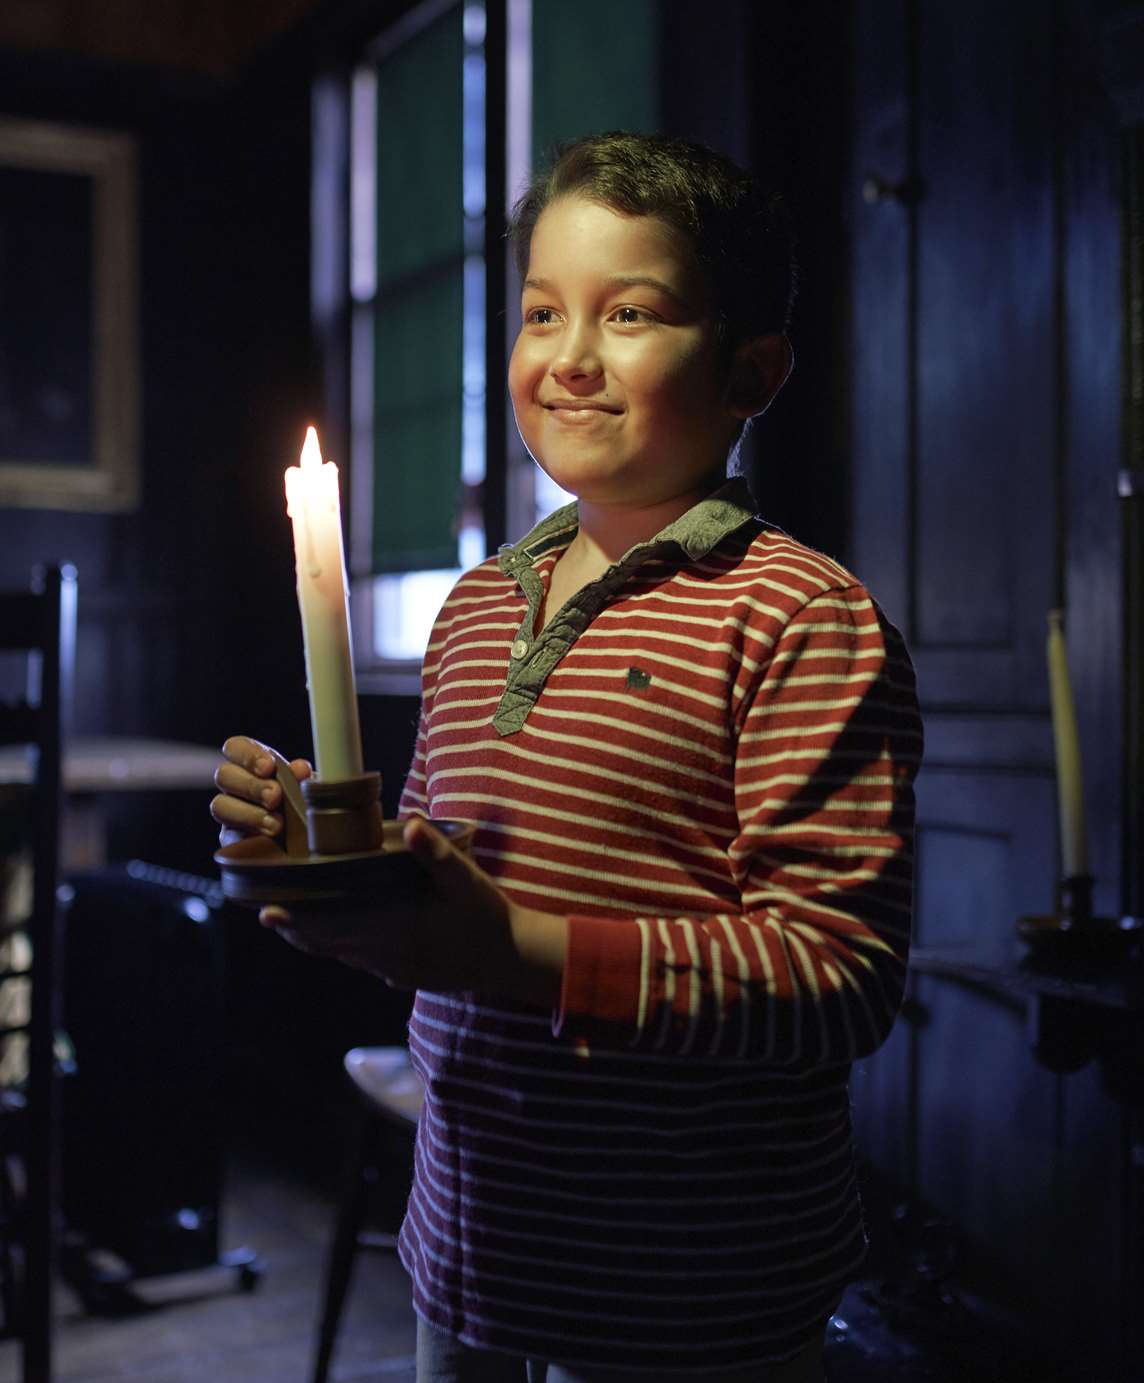 Image: A child carrying a candle in the dark at Boscobel House